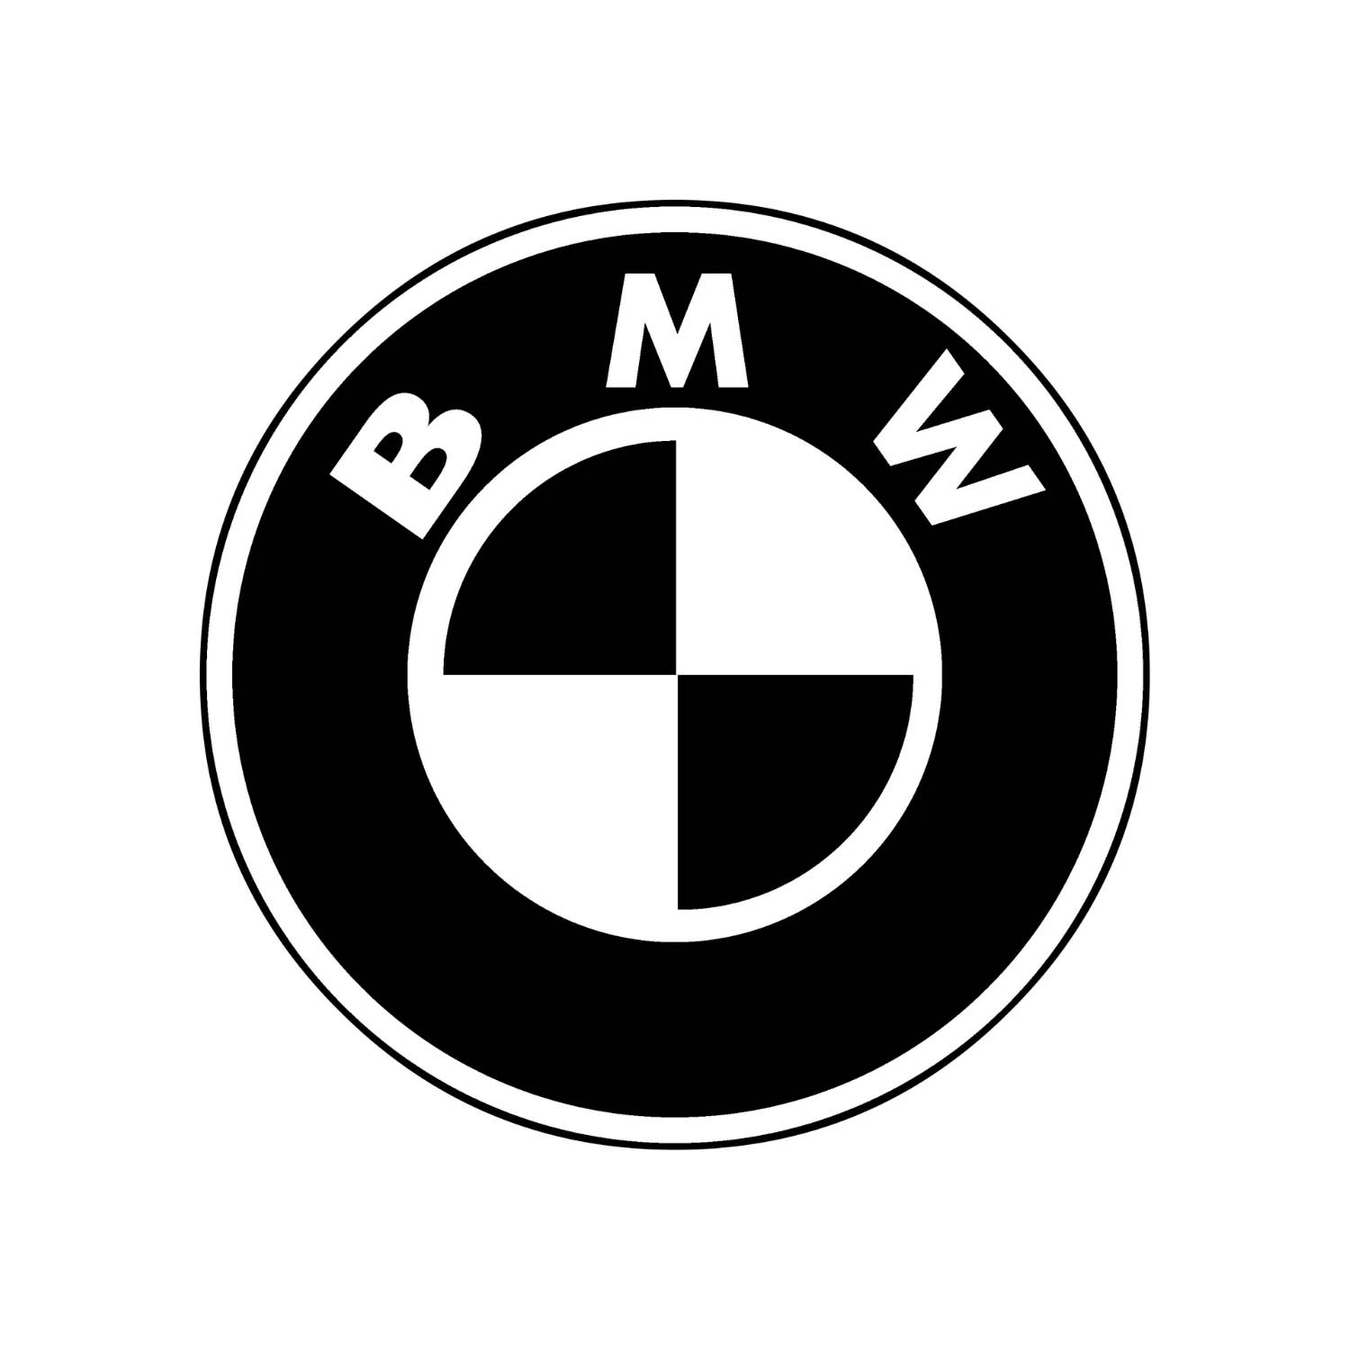 BMW Boot Liners